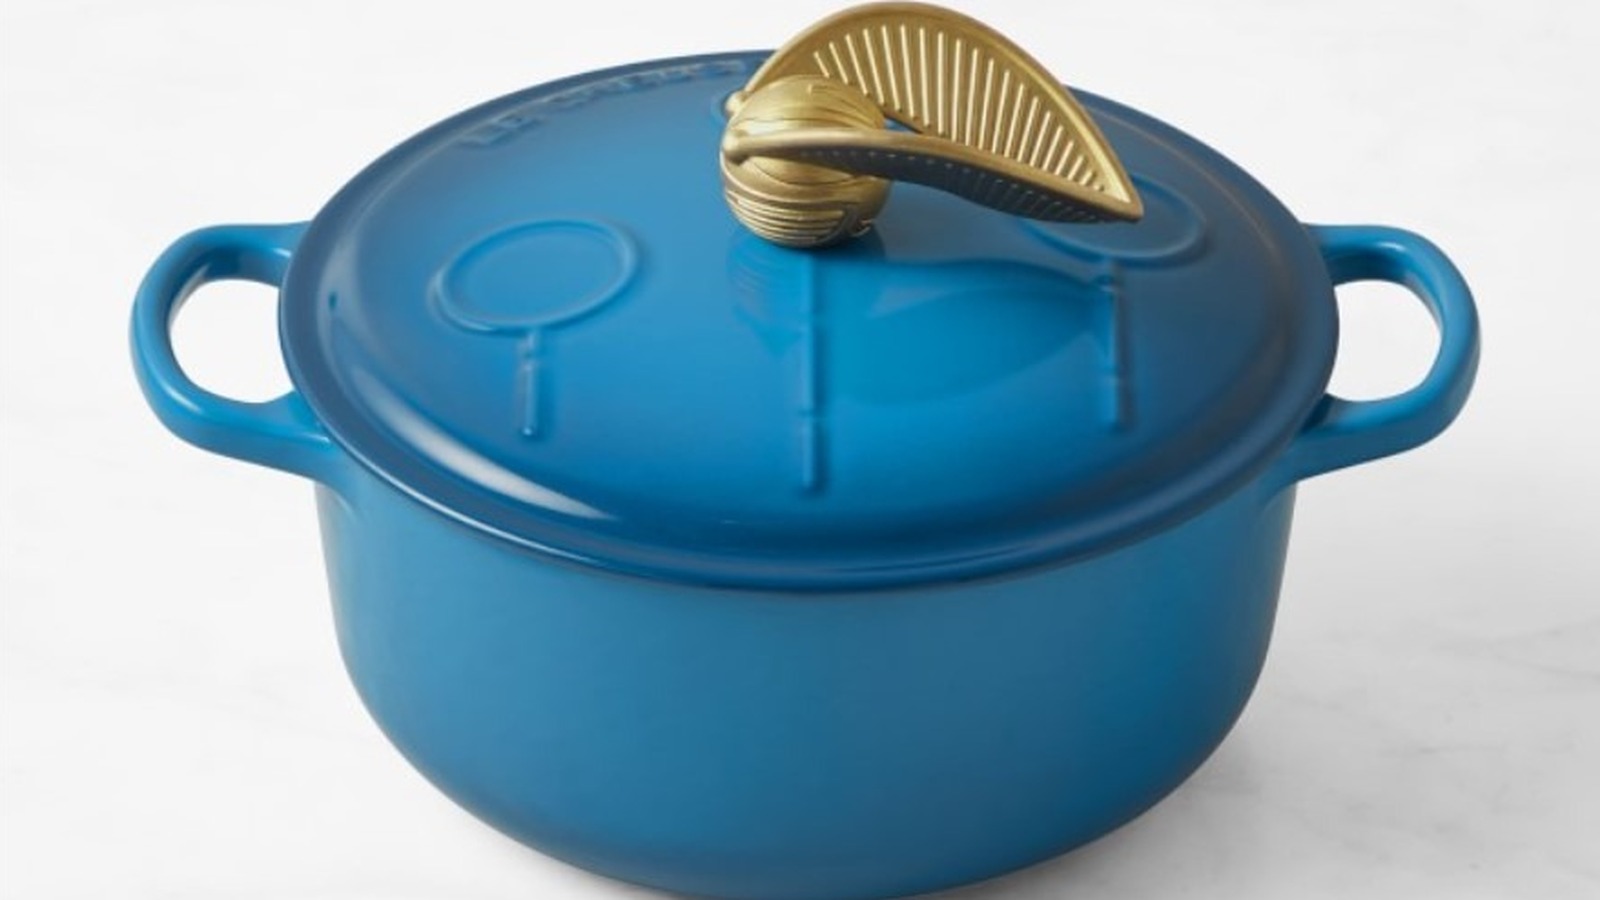 Harry Potter Fans Will Love This New Le Creuset Collection